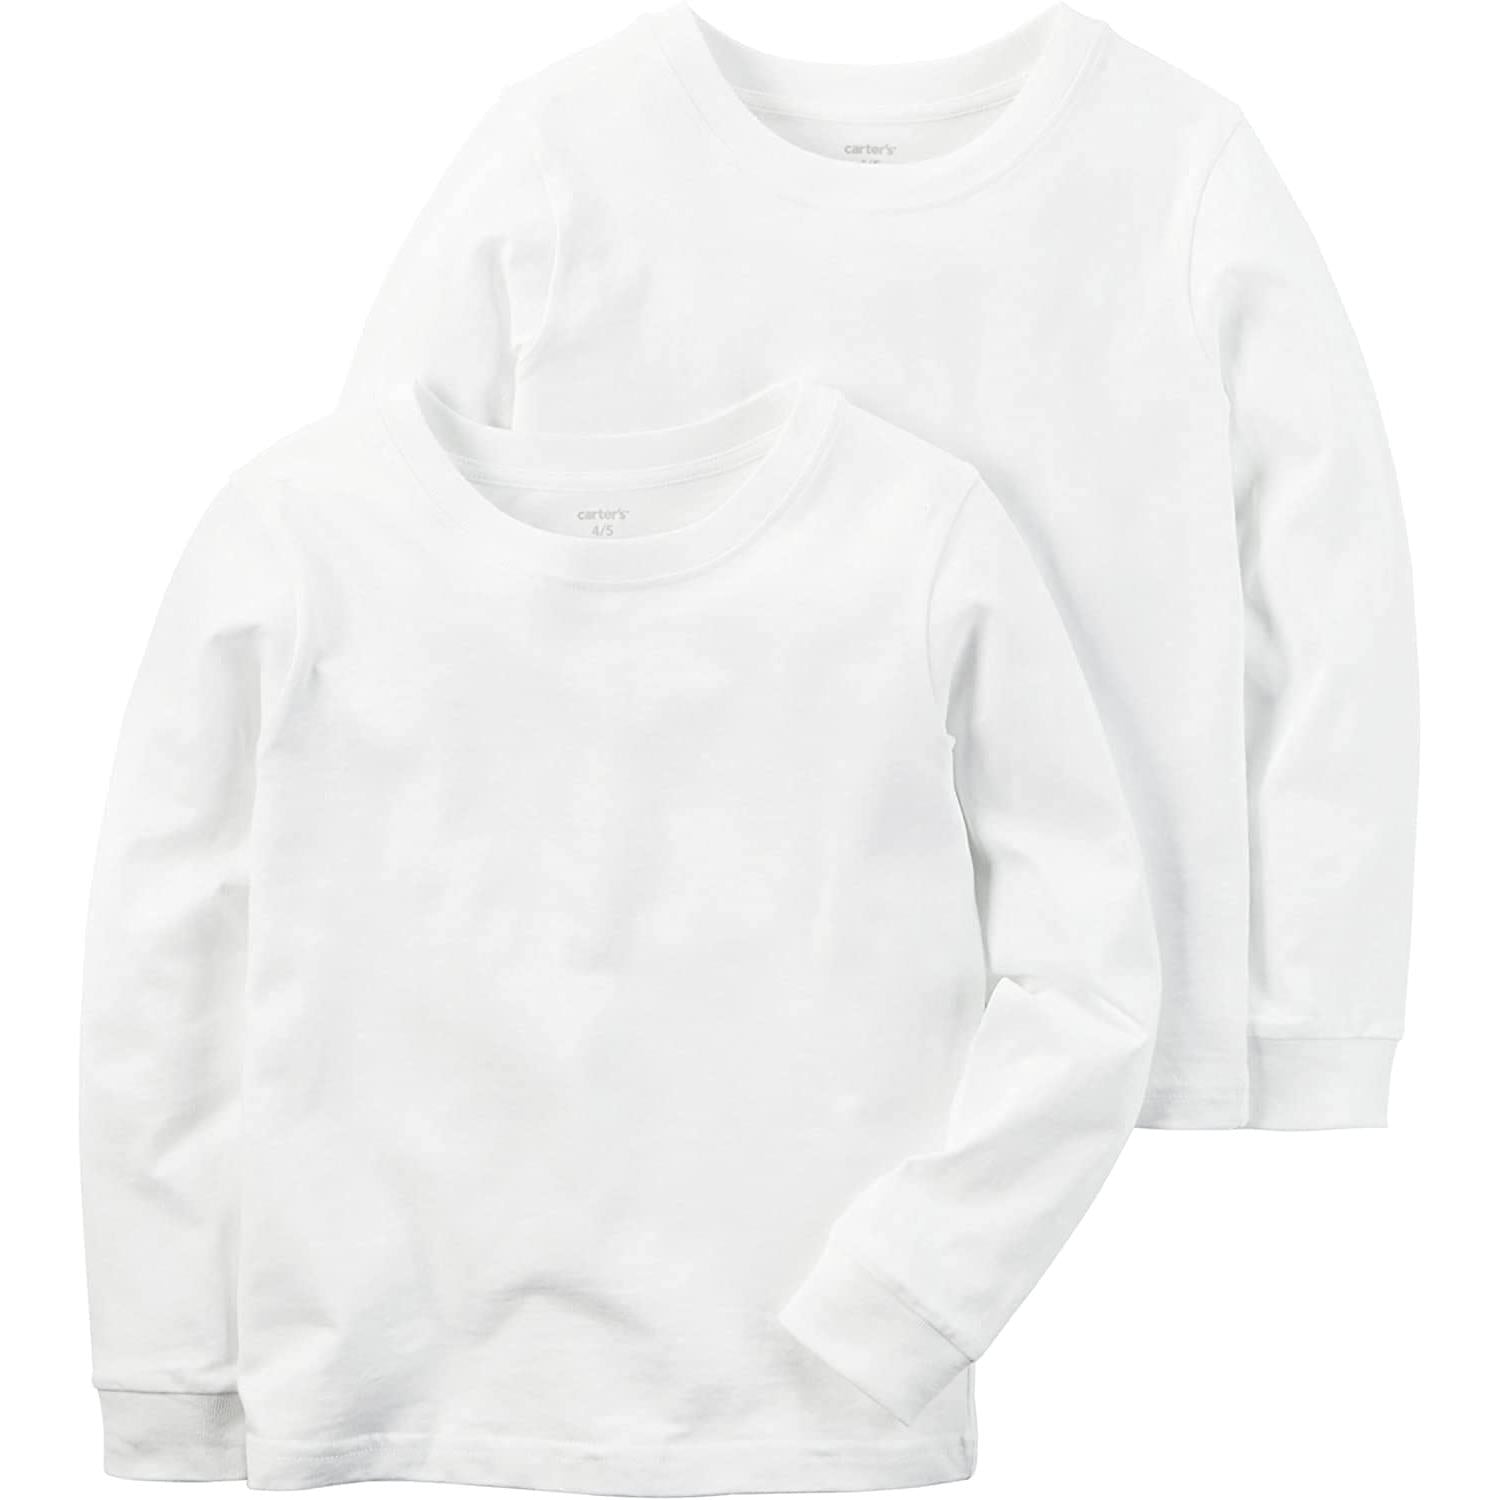 Carter's Little Boys' Long Sleeve 2-Pack Cotton Undershirts (White, 10/12)